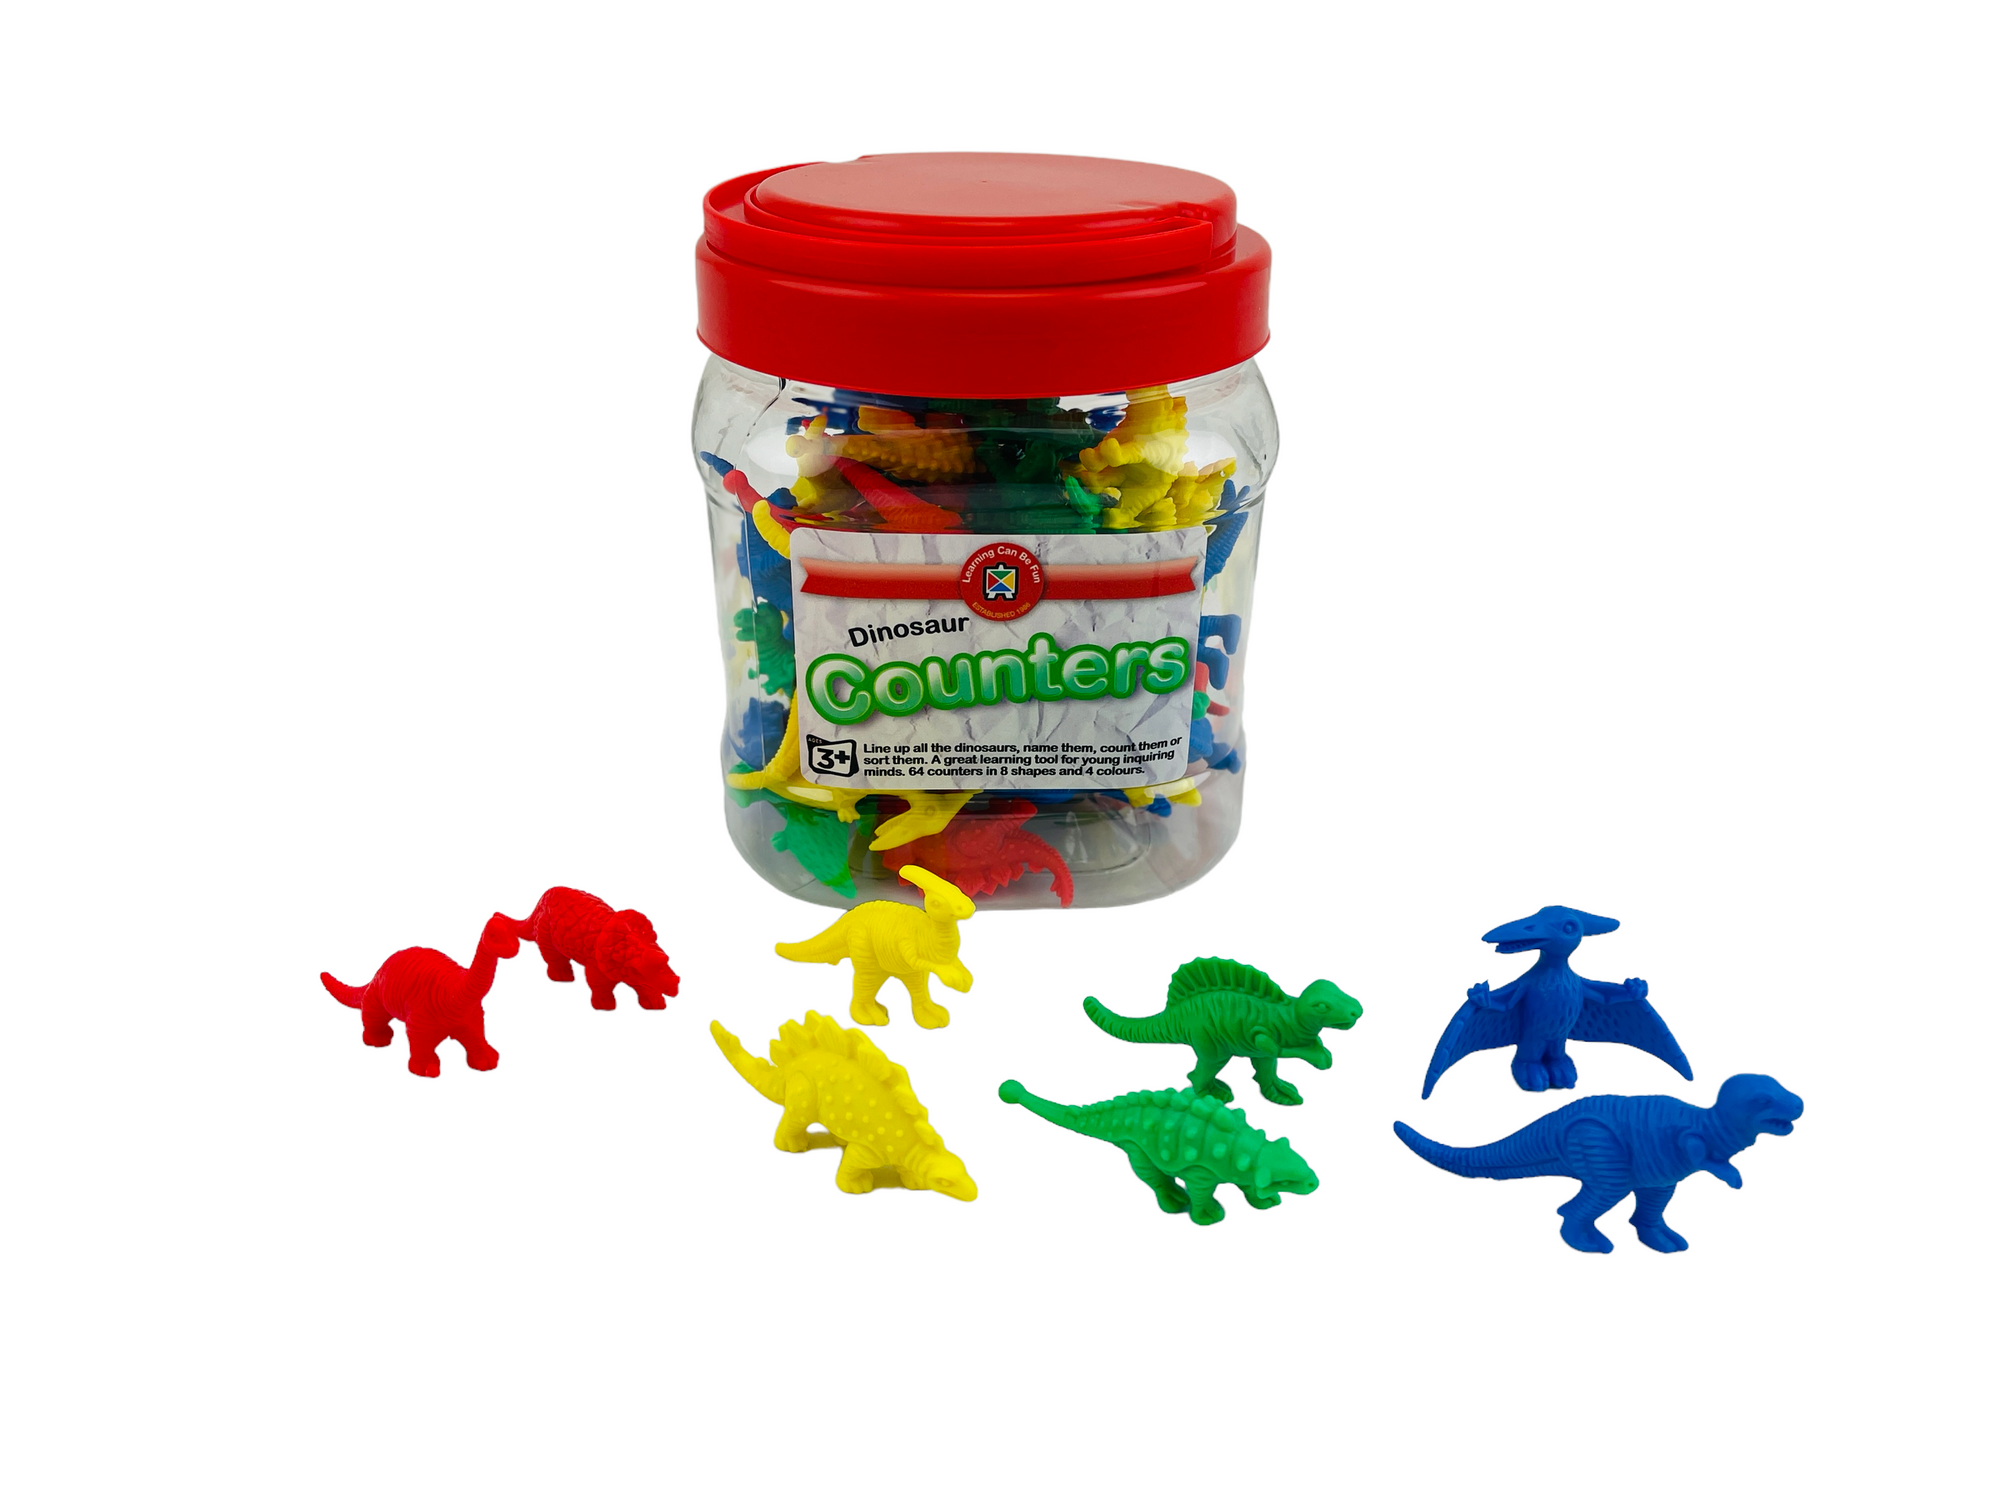 Dinosaur Counters 64 Pk on display with 8 dinosaurs in front of the tub